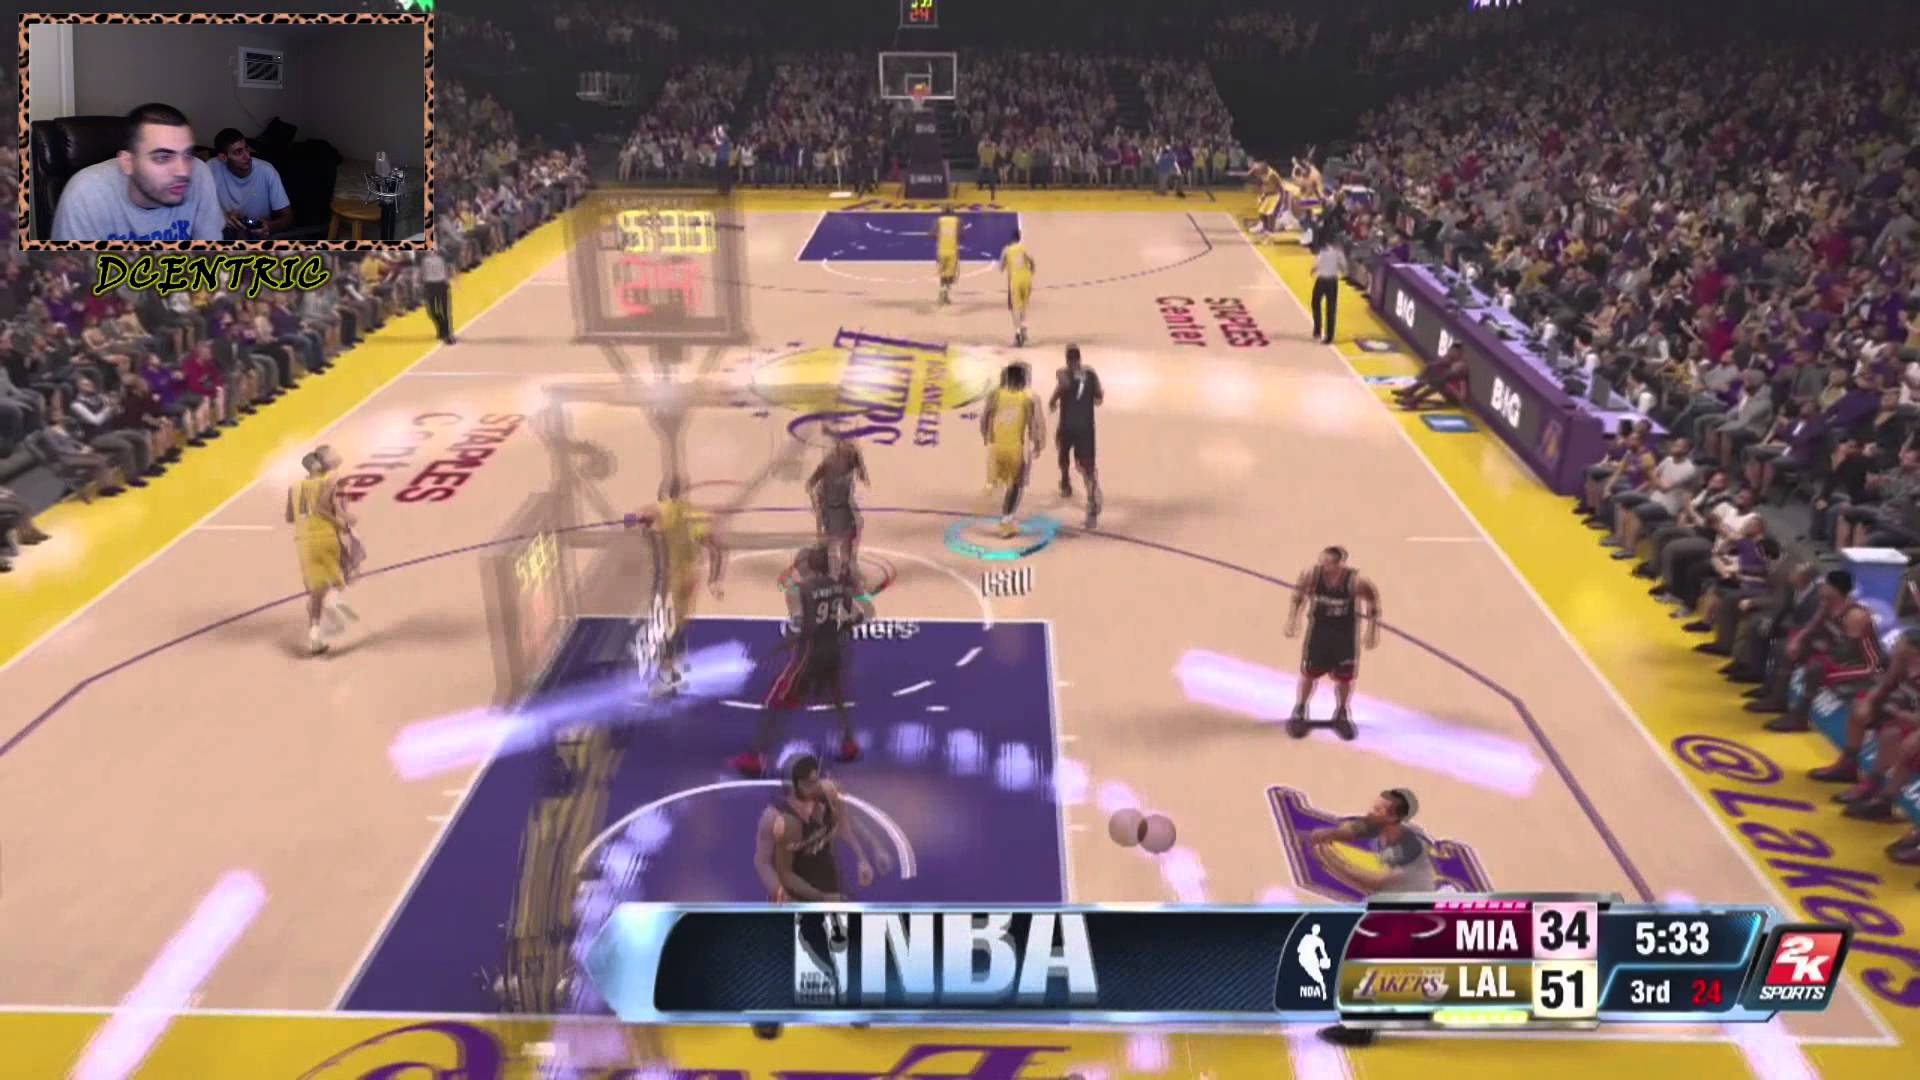 Miami Heat 2015 vs Lakers 2015 2k14 Updated Rosters Gameplay